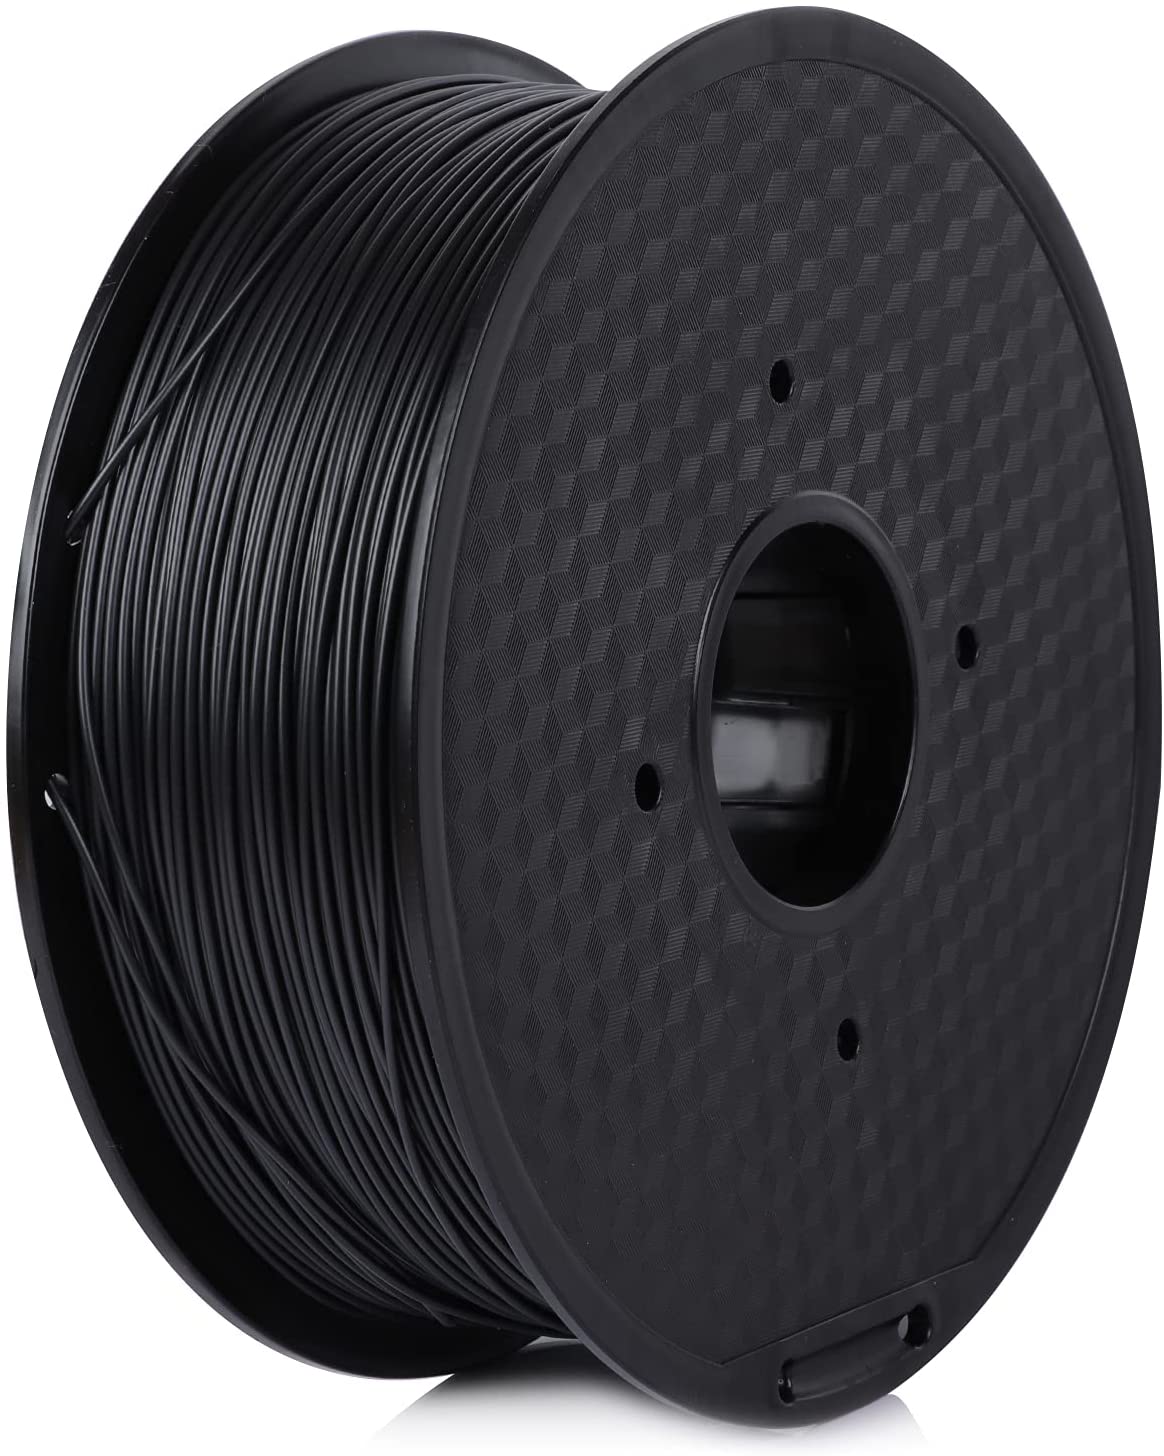 Fused Materials Fireproof Black ABS 3D Printer Filament – 1kg Spool, 1.75mm,  Dimensional Accuracy +/- 0.03 mm, (Black) –